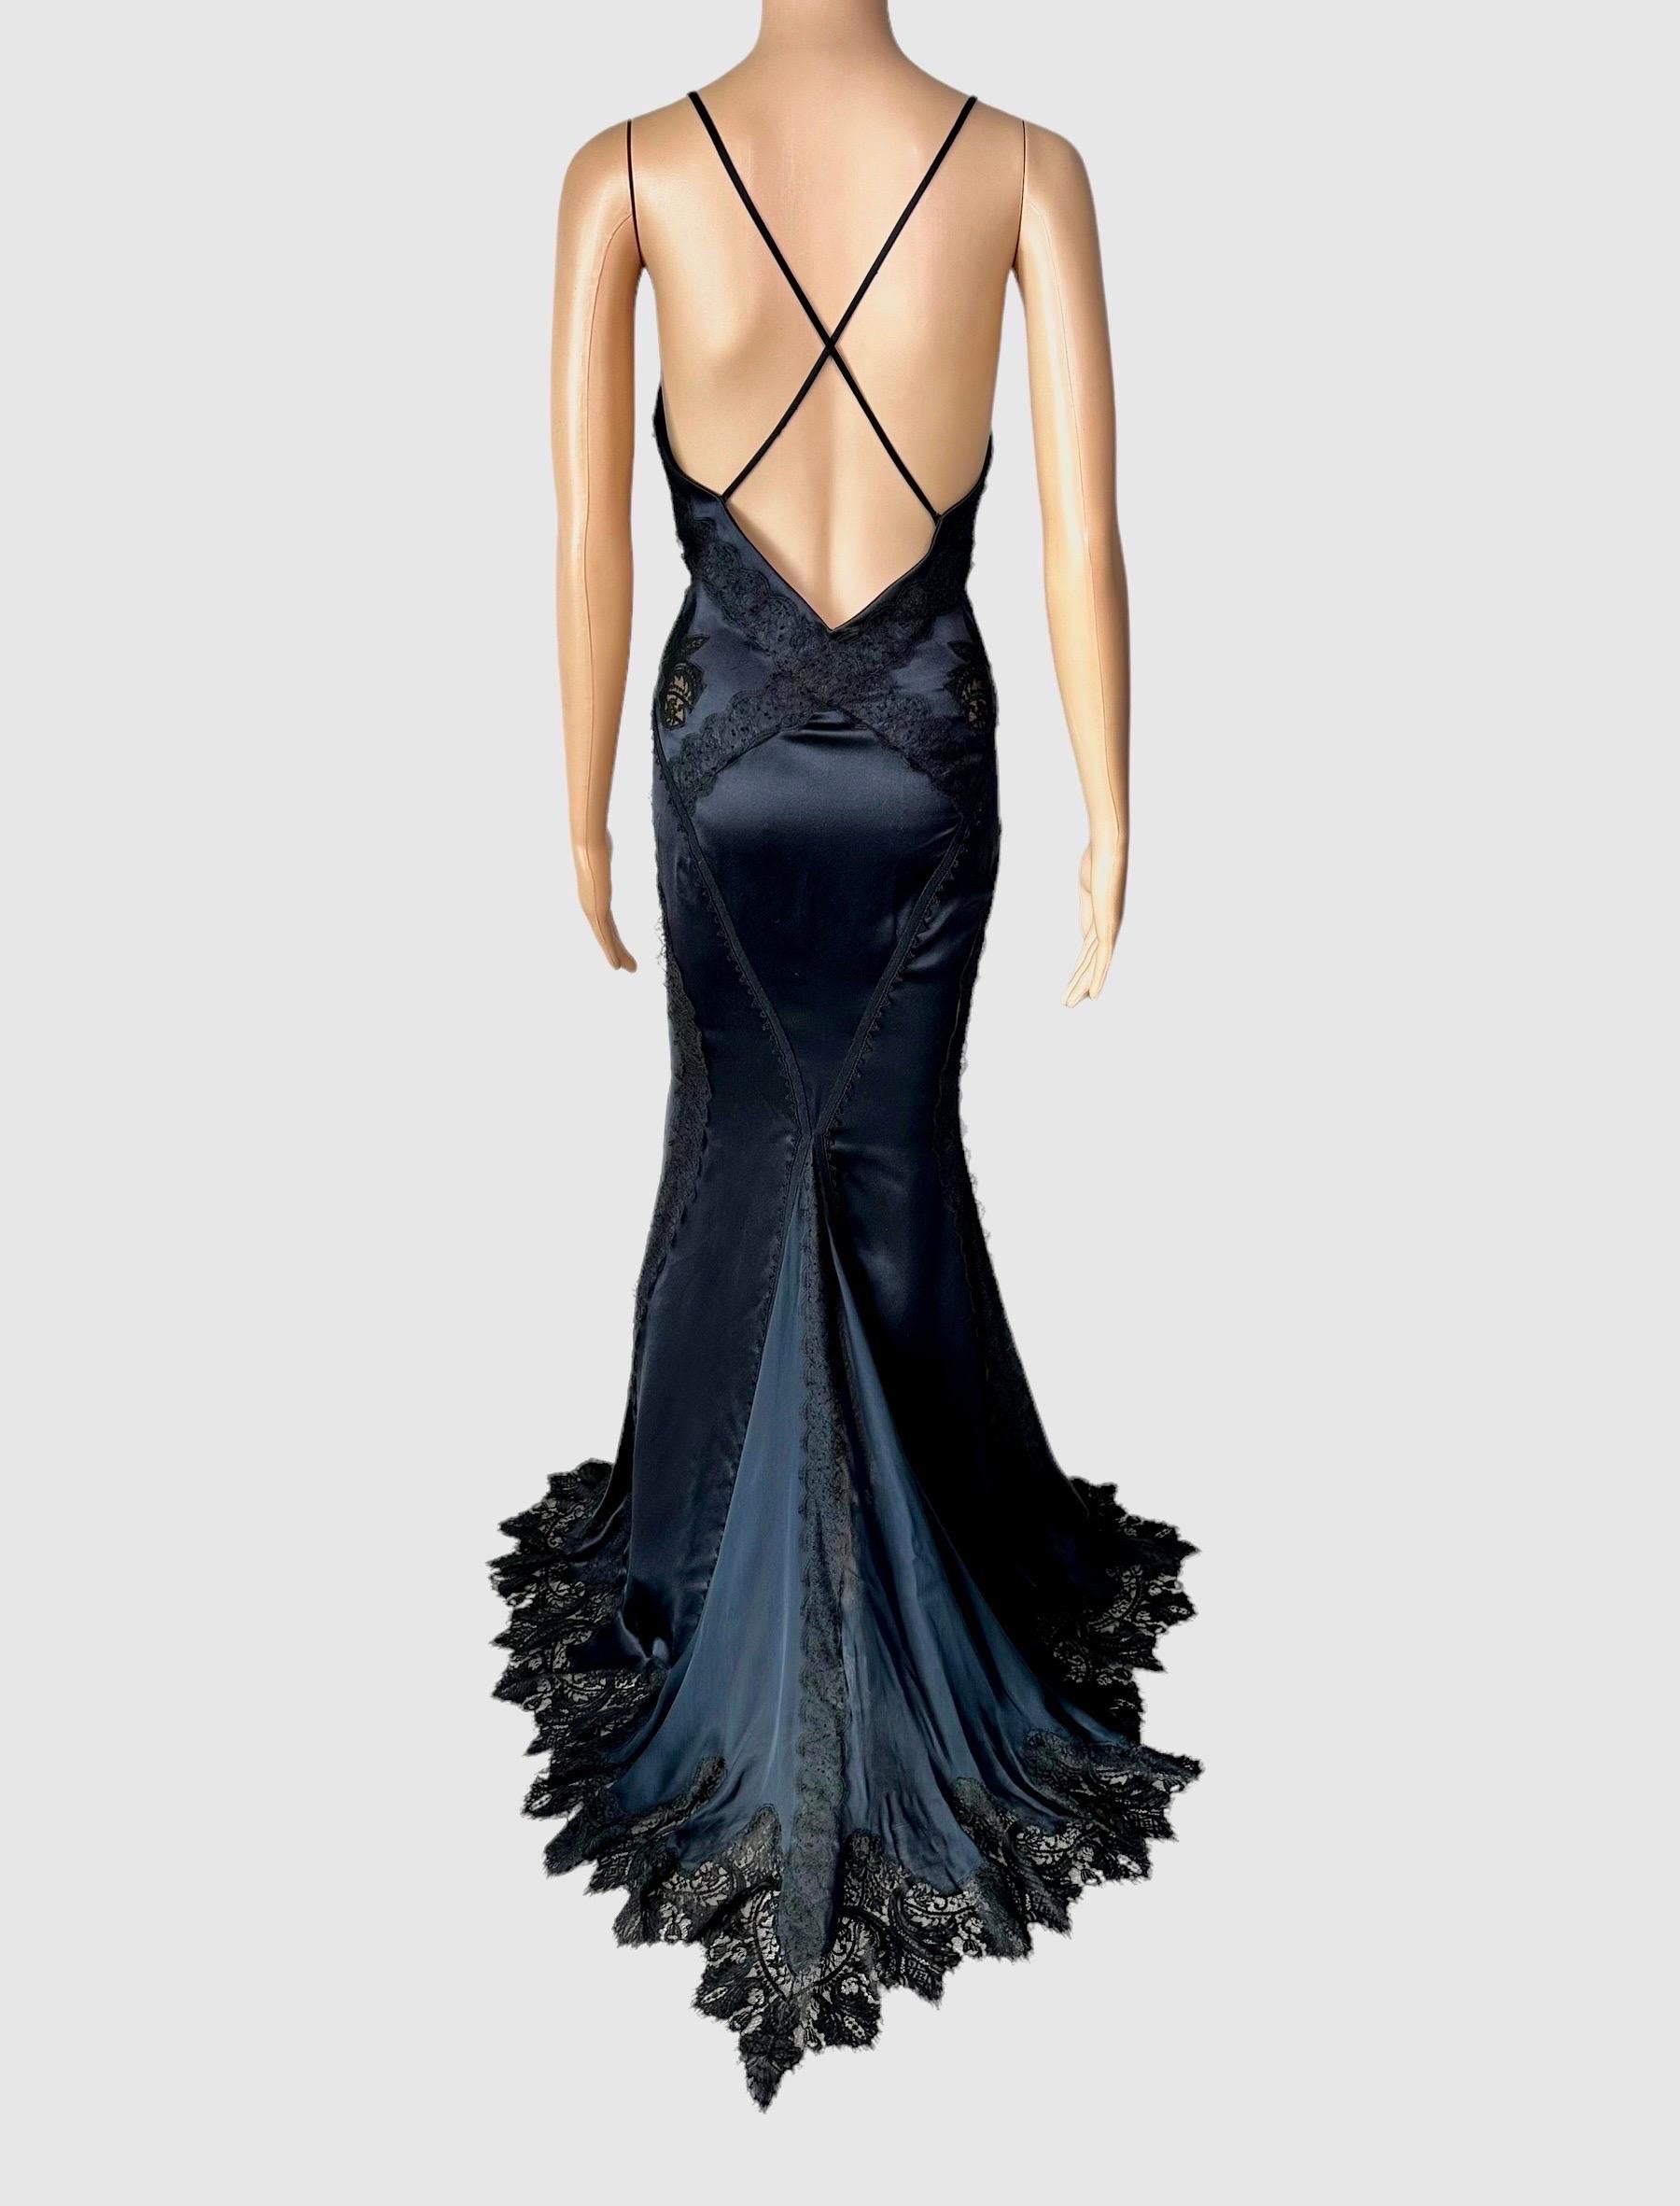 Versace c.2006 Plunging Neckline Sheer Lace Panels Backless Evening Dress Gown  For Sale 7